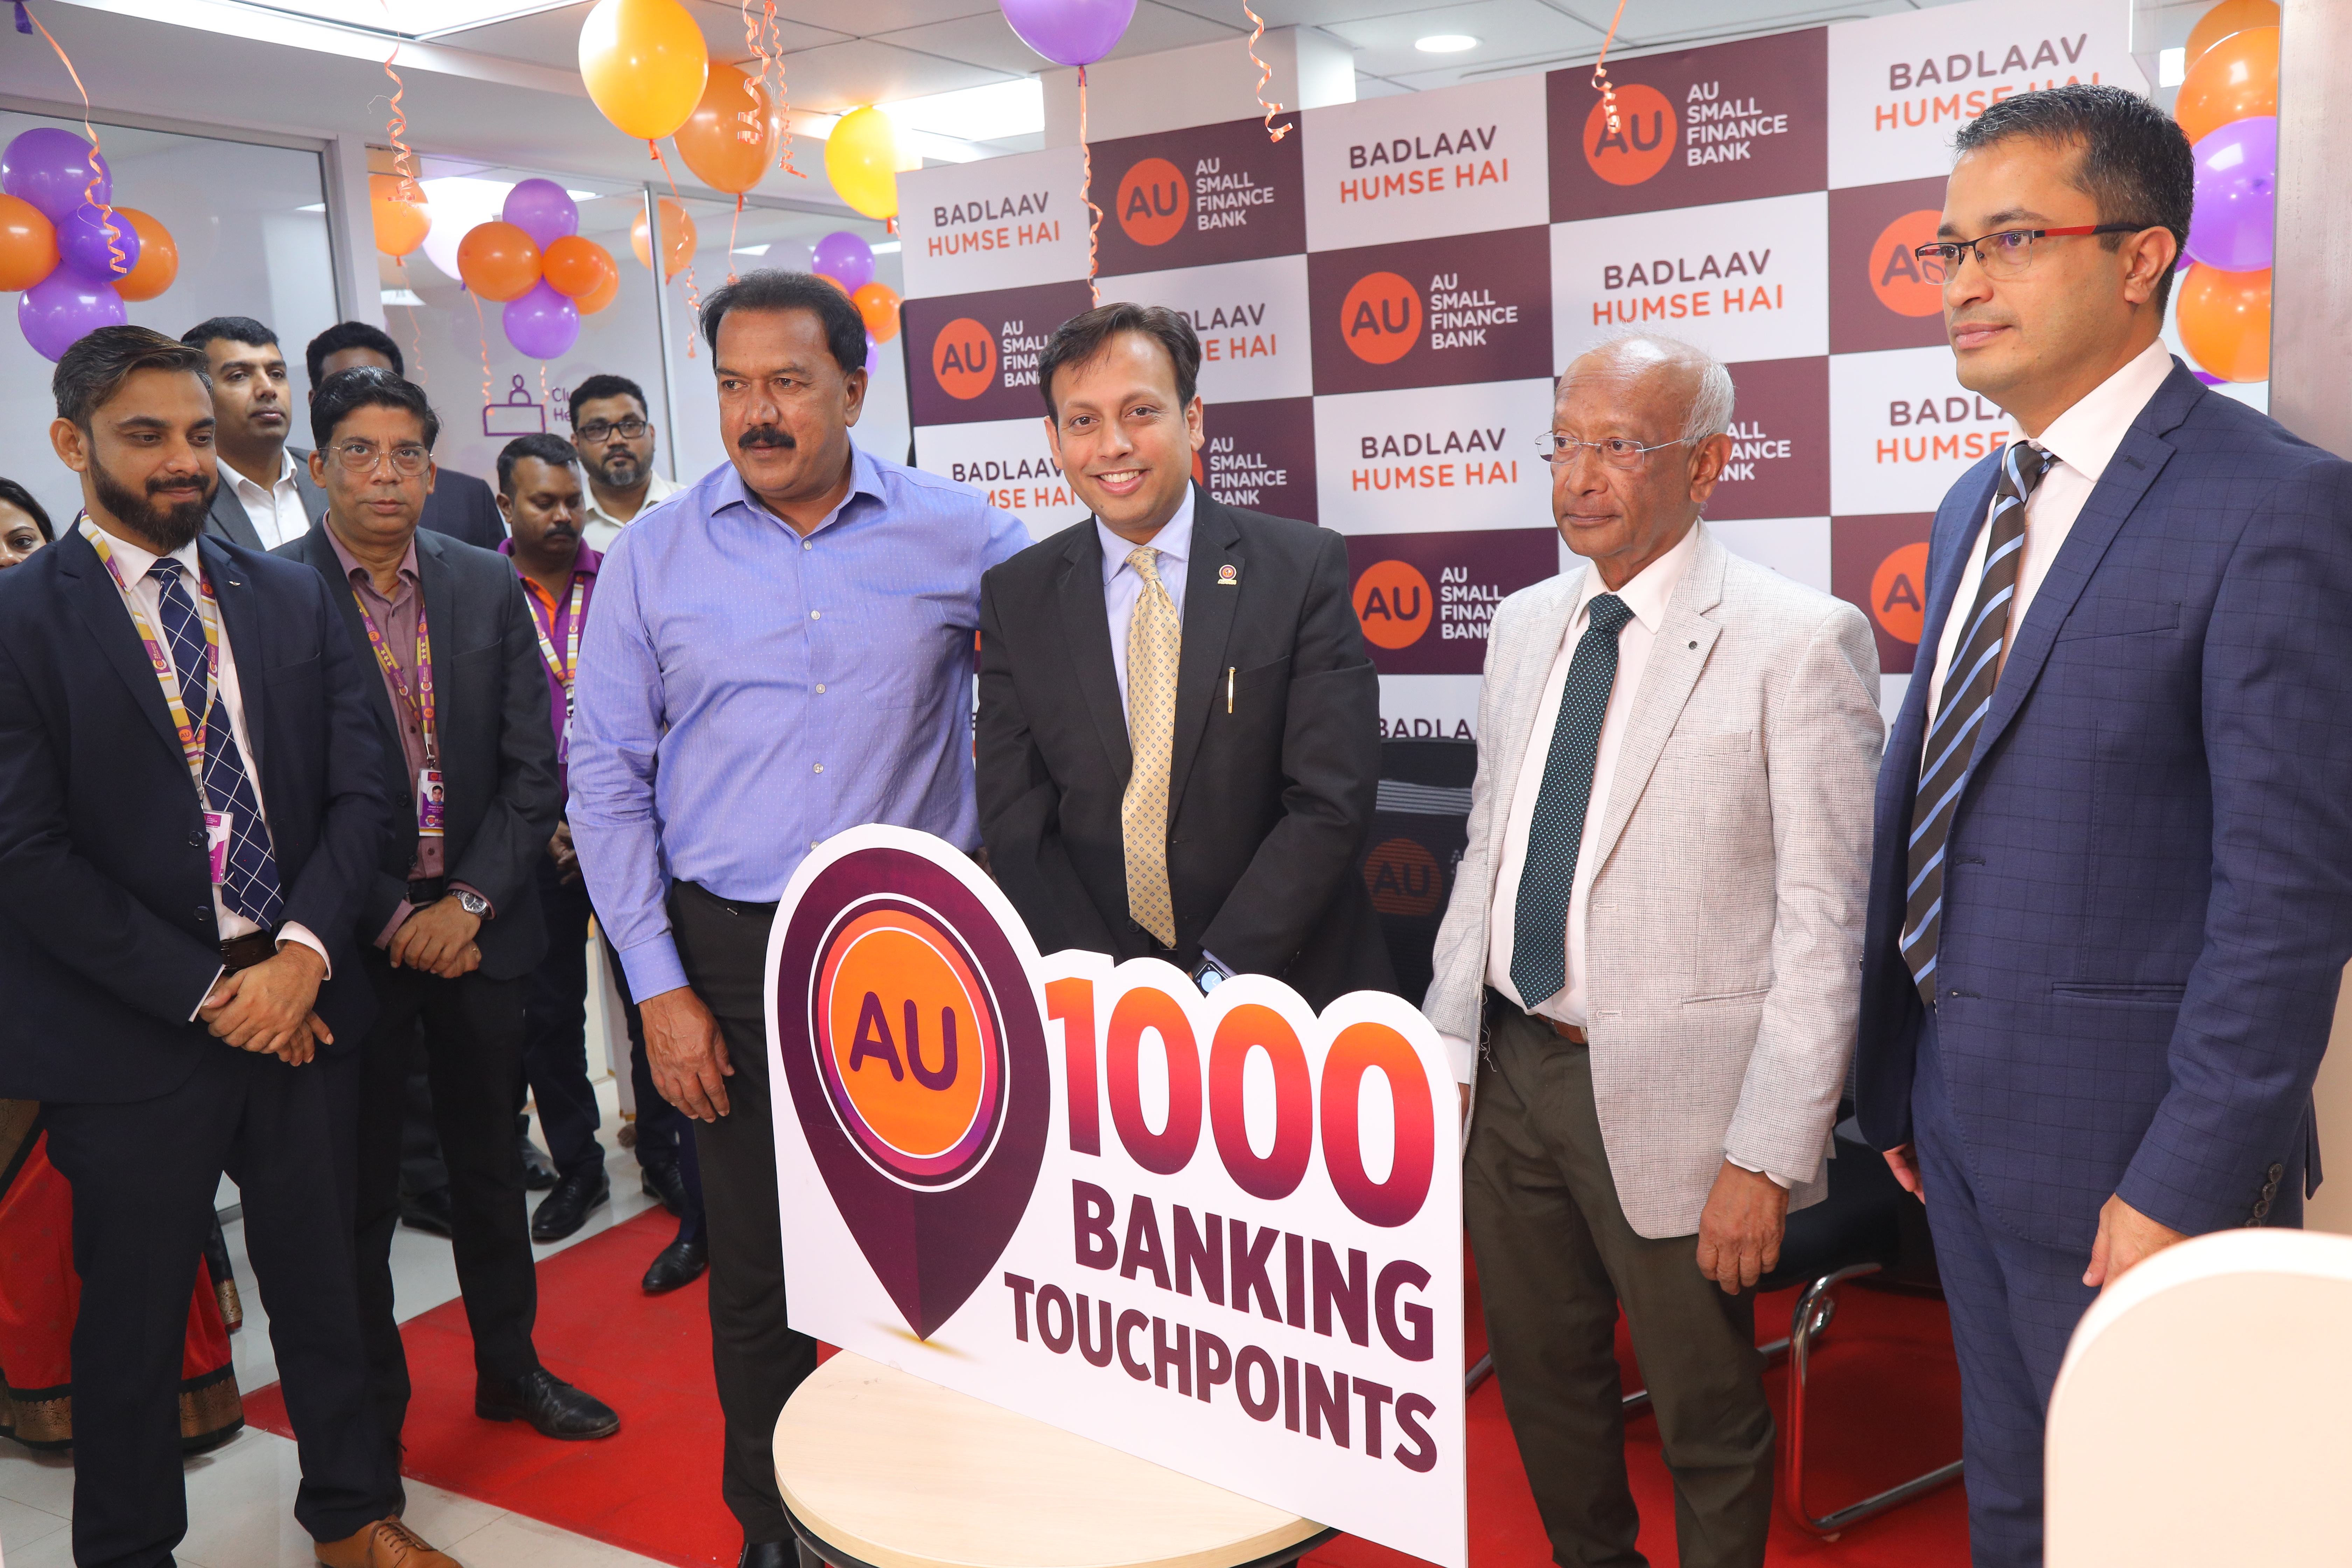 AU Small Finance Bank launches its 1000th Banking Touchpoint